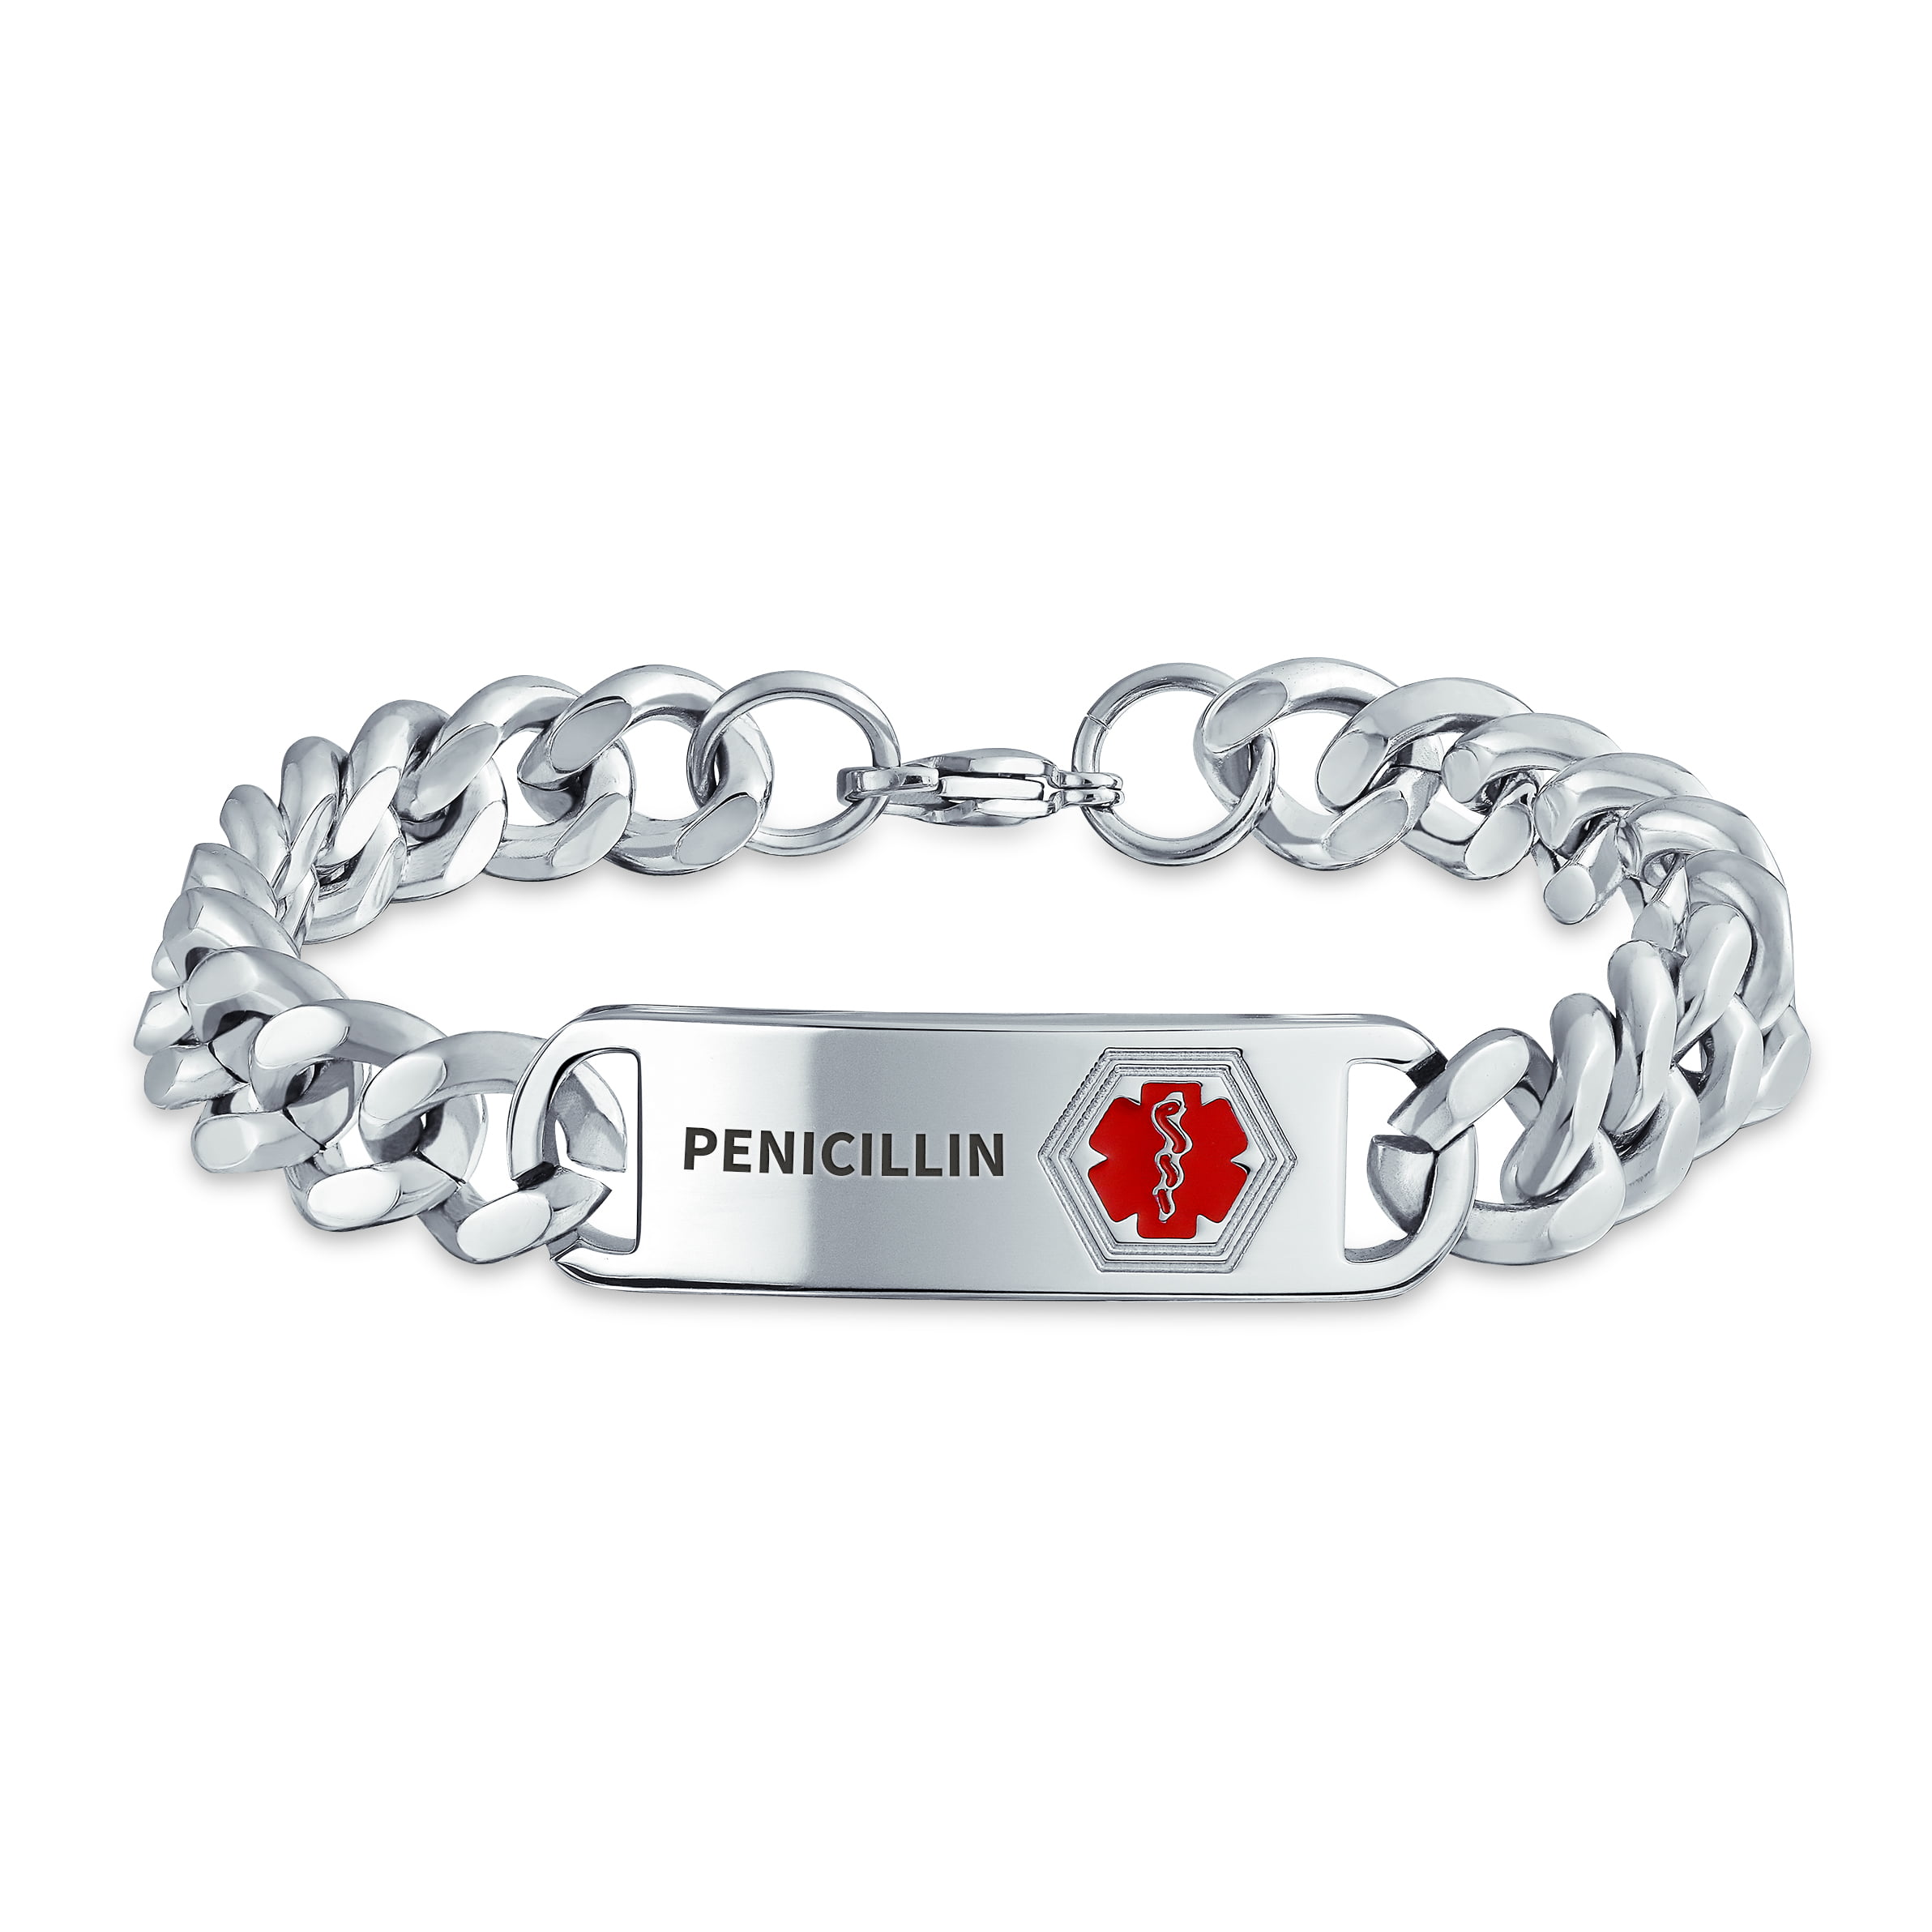 Personalized Medical Identification Doctors Medical Alert ID Bracelet Silver Tone Stainless